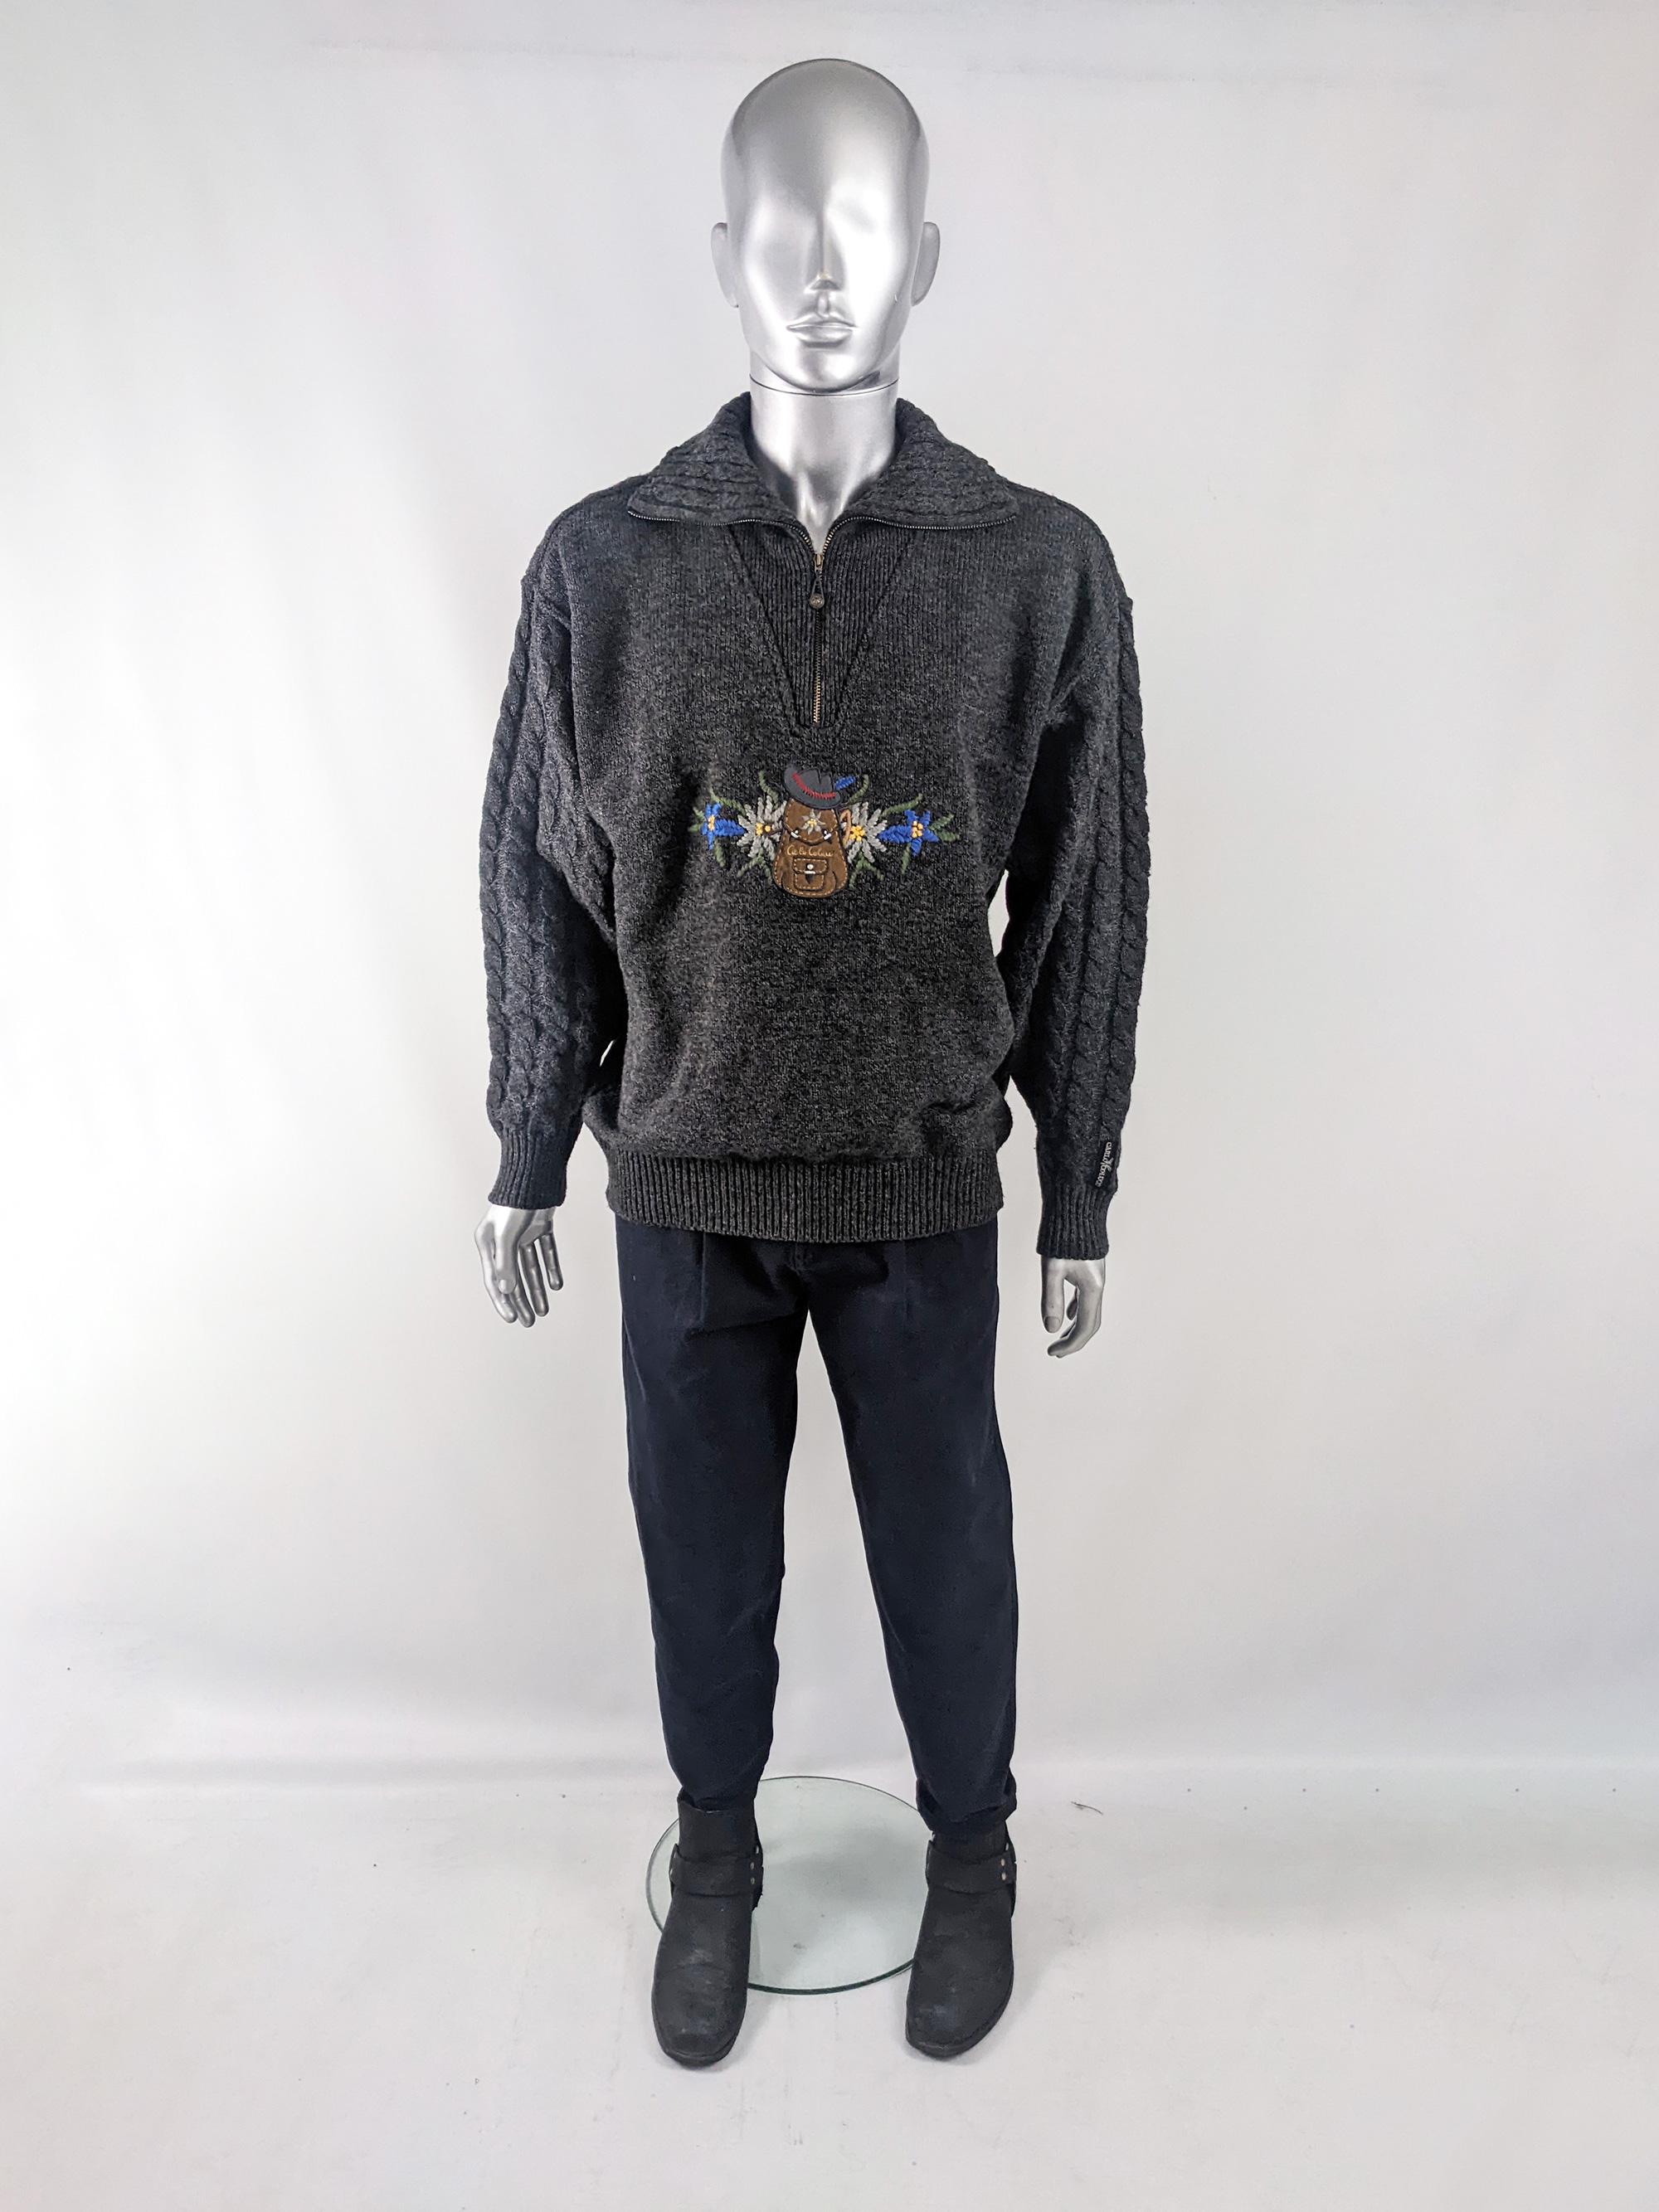 An amazing vintage mens sweater from the 80s by luxury Italian knitwear label, Carlo Colucci. In a grey wool-rich knit fabric with a zip collar, Austrian style embroidery with a suede patch on the front and cable knit sleeves and back.

Size: Marked